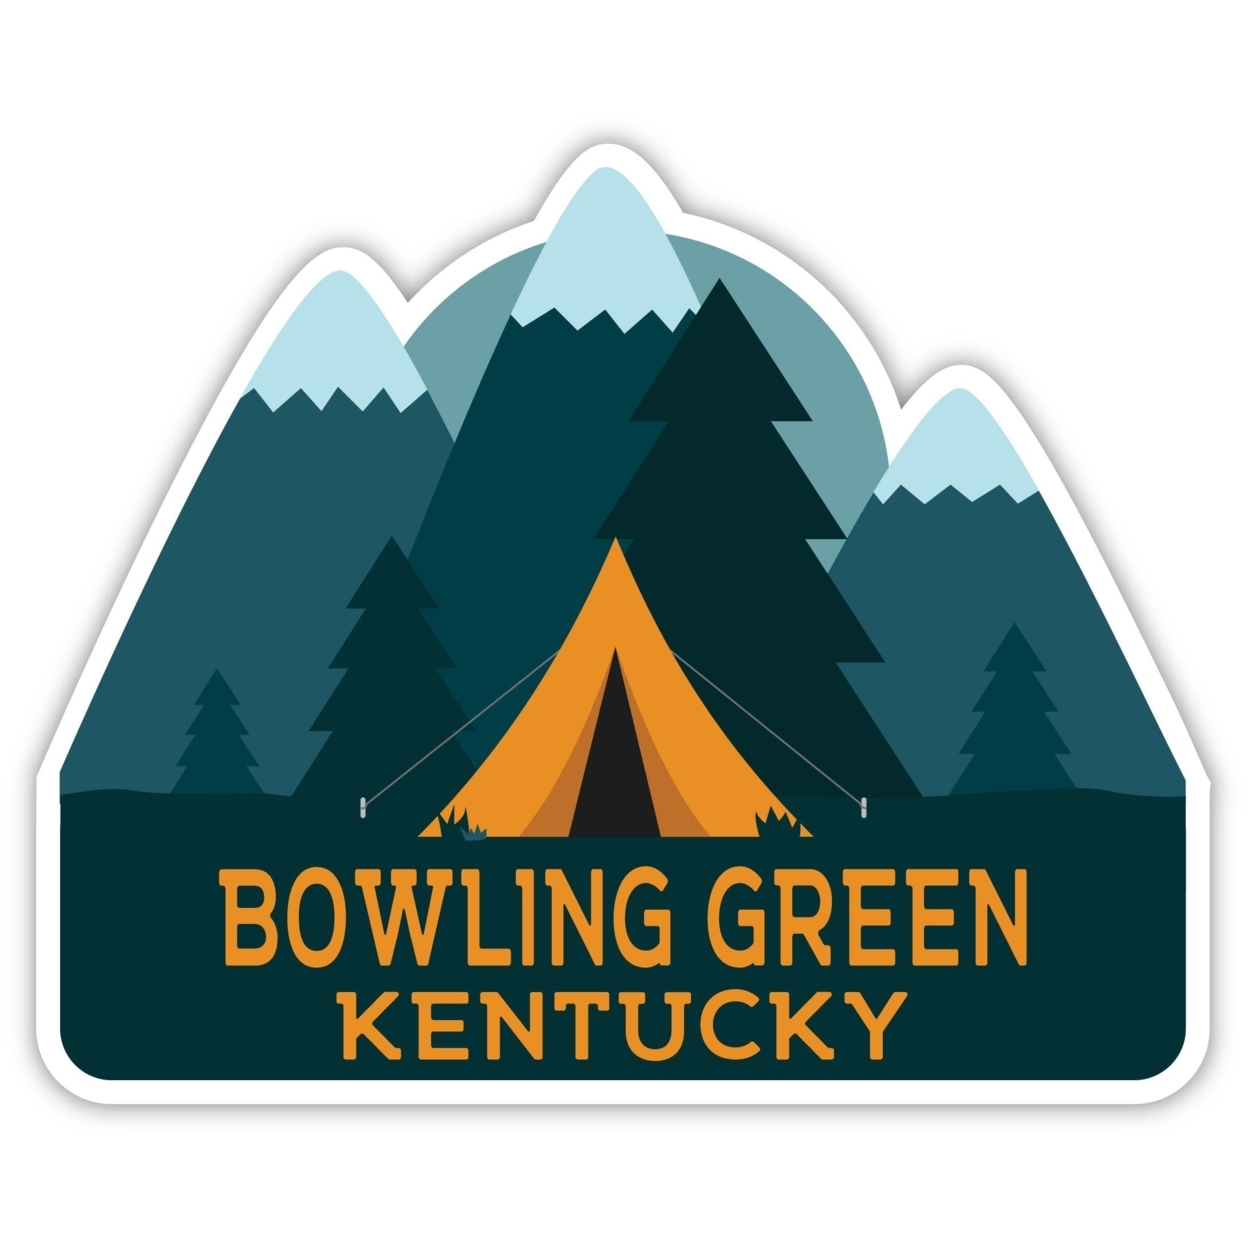 Bowling Green Kentucky Souvenir Decorative Stickers (Choose Theme And Size) - 4-Pack, 6-Inch, Tent